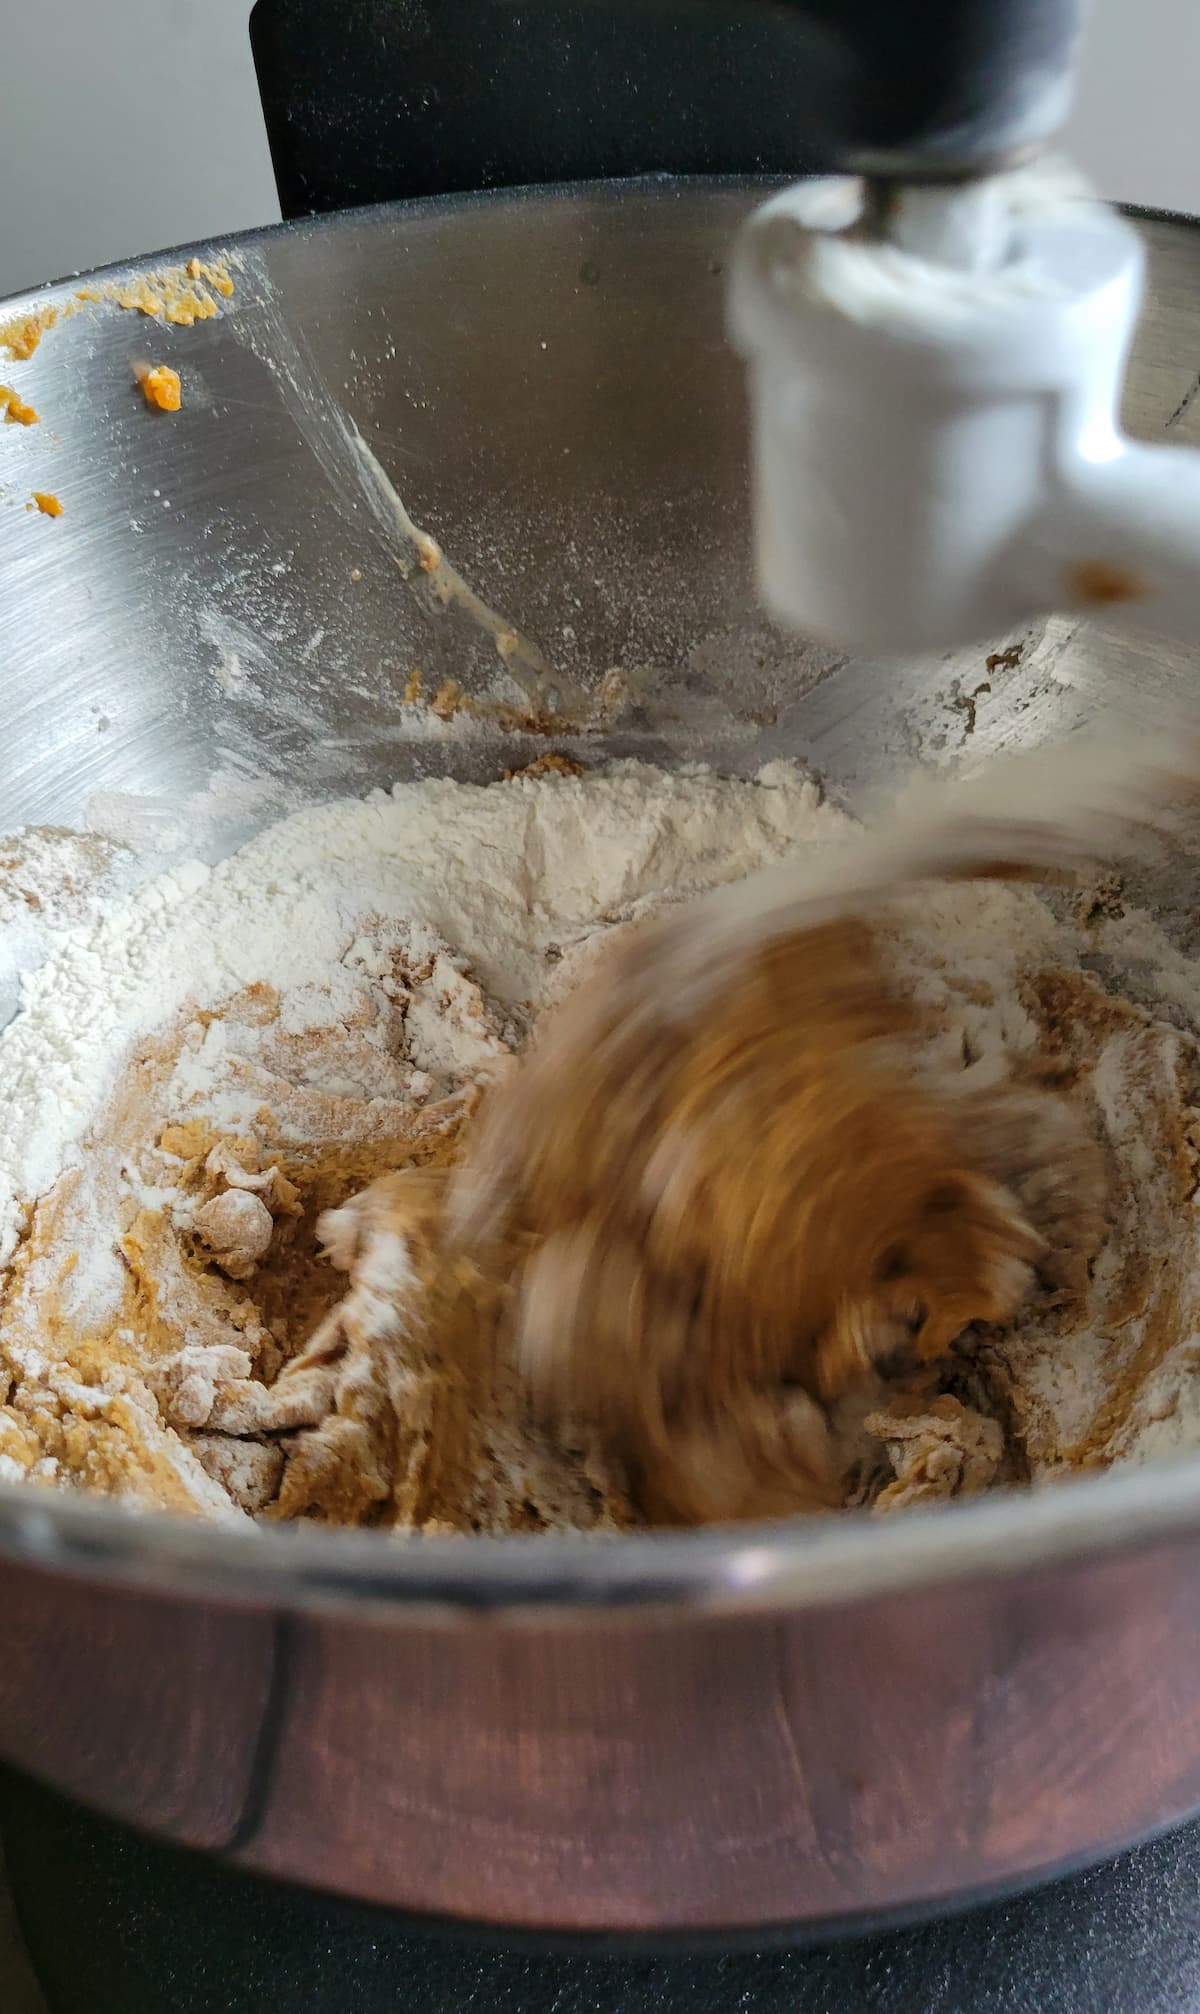 flour and other ingredients mixing in a bowl